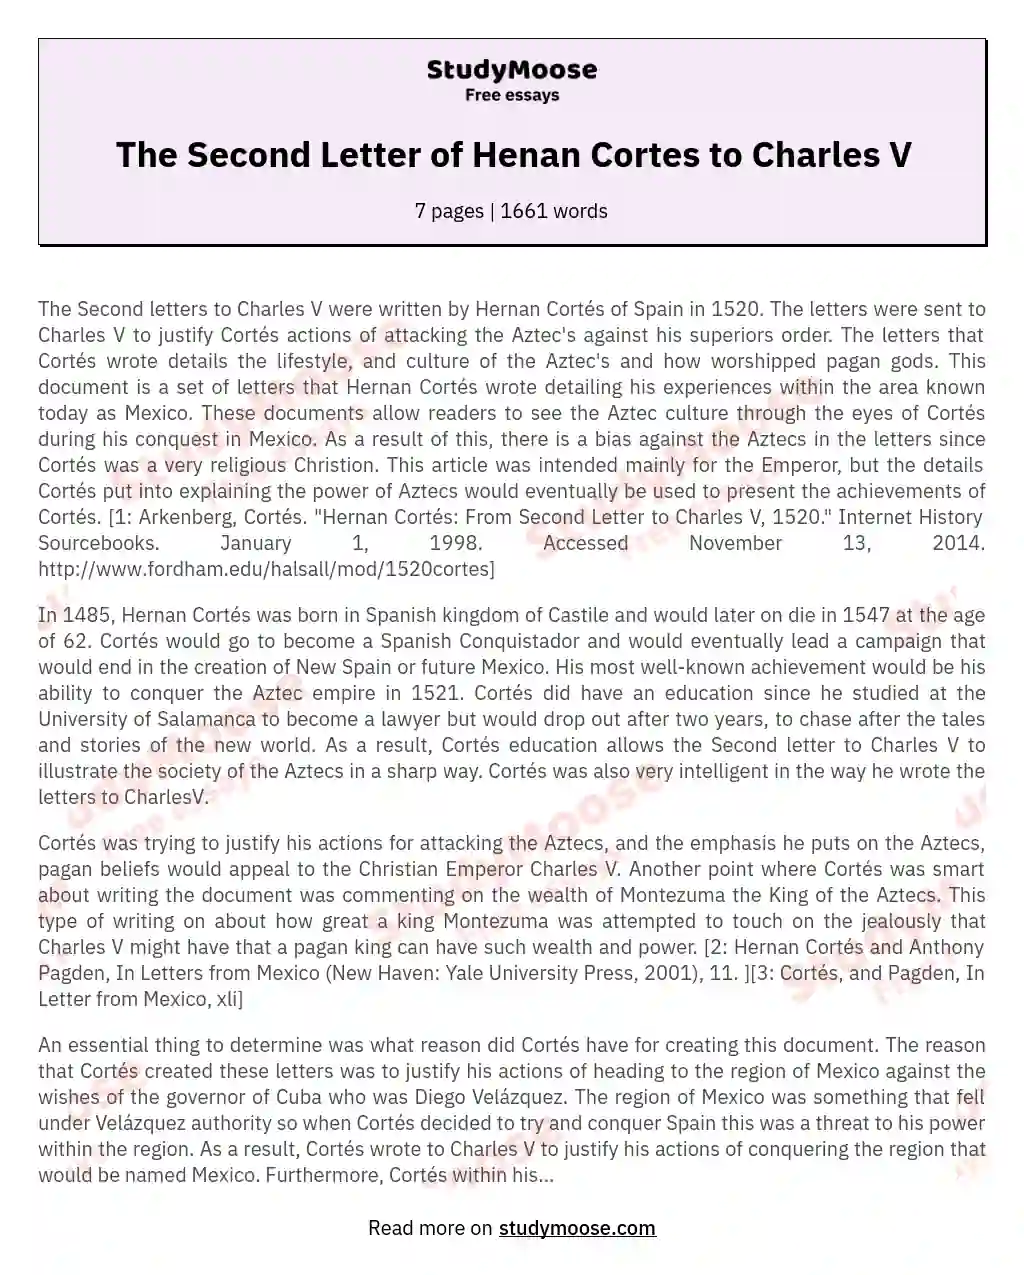 The Second Letter of Henan Cortes to Charles V essay